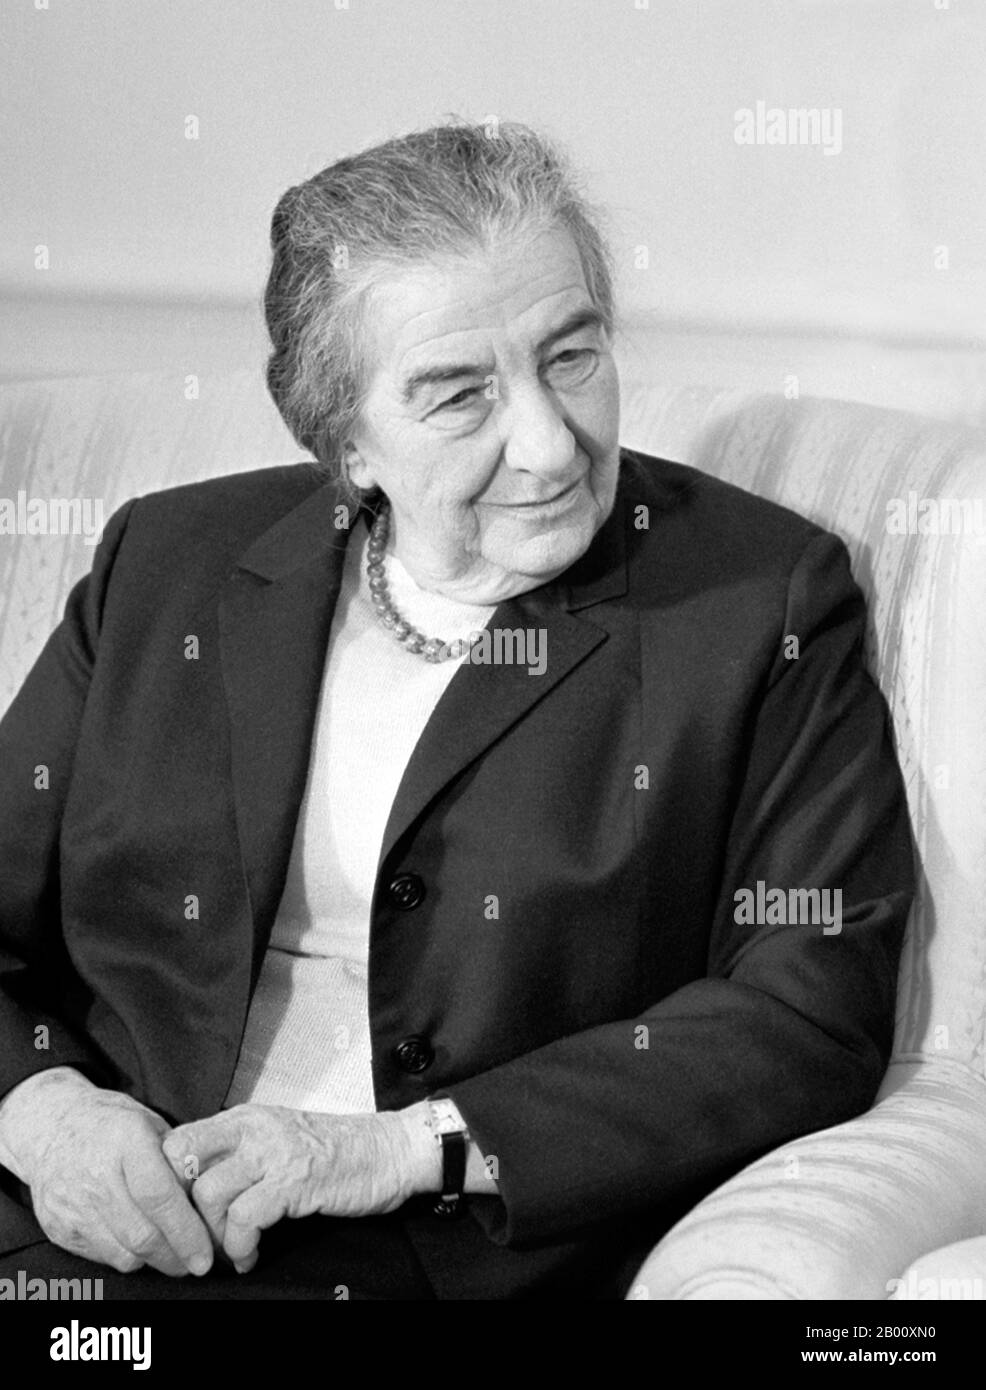 Israel: Golda Meir (1898-1878), fourth Prime Minister of Israel (1969-1974). Photo by Marion S. Trikosko, 1 March 1973.  Golda Meir, 3 May 1898 – 8 December 1978, was the fourth Prime Minister of the State of Israel. Born Ukranian in the former Soviet Union, she migrated to the USA in 1906 and subsequently to historic Palestine in 1921. Meir was elected Prime Minister of Israel on 17 March 1969 after serving as Minister of Labour and Foreign Minister. Israel's first and the world's third woman to hold such an office, she was described as the 'Iron Lady' of Israel. Stock Photo